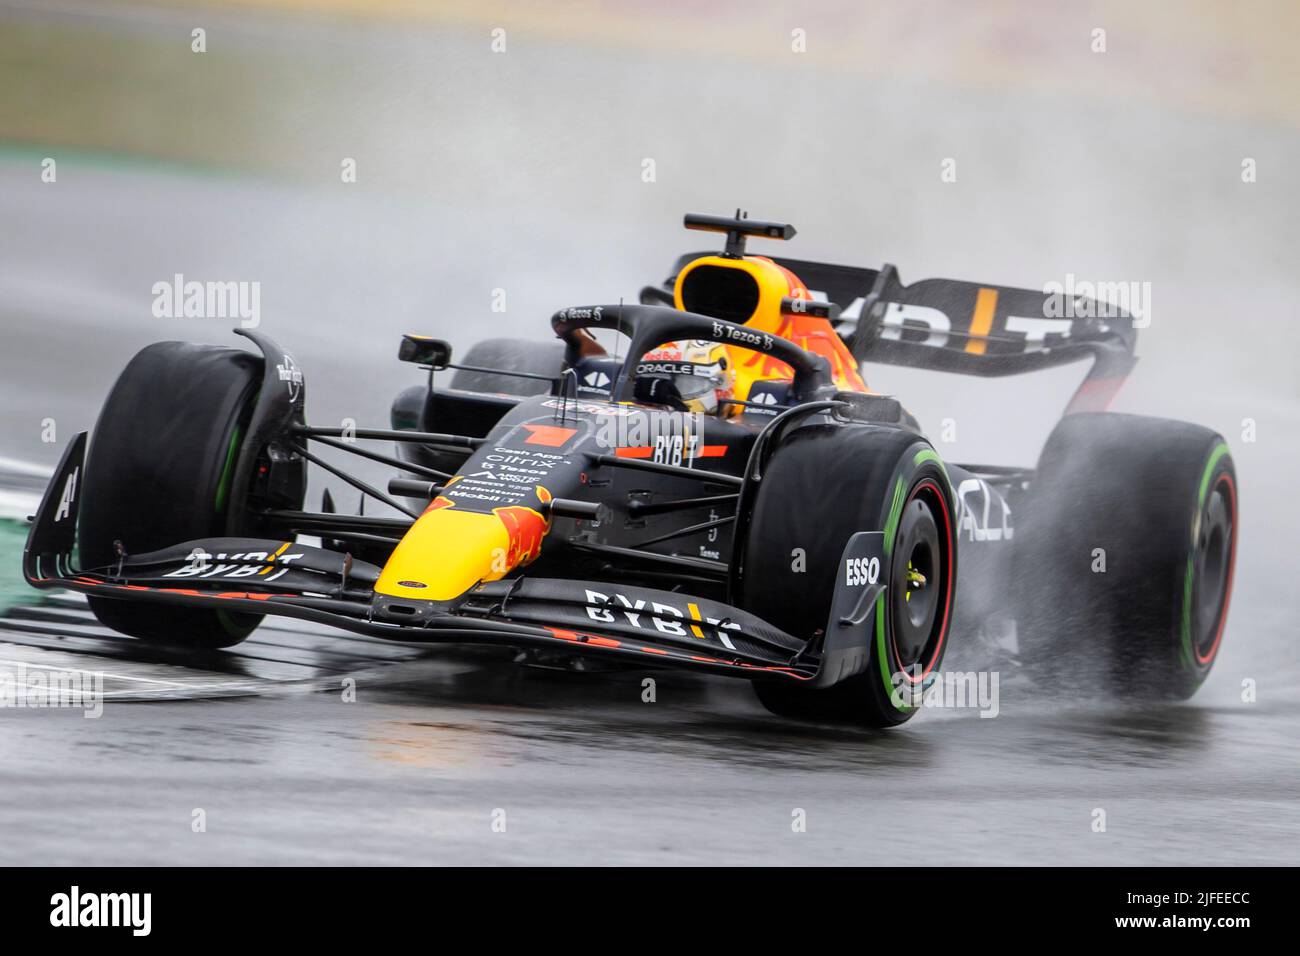 Silverstone, UK. 2nd July 2022, Silverstone Circuit, Silverstone, Northamptonshire, England: British Grand Prix, qualifying sessions: Oracle Red Bull Racing driver Max Verstappen in his Red Bull Racing-RBPT RB18 in the rain